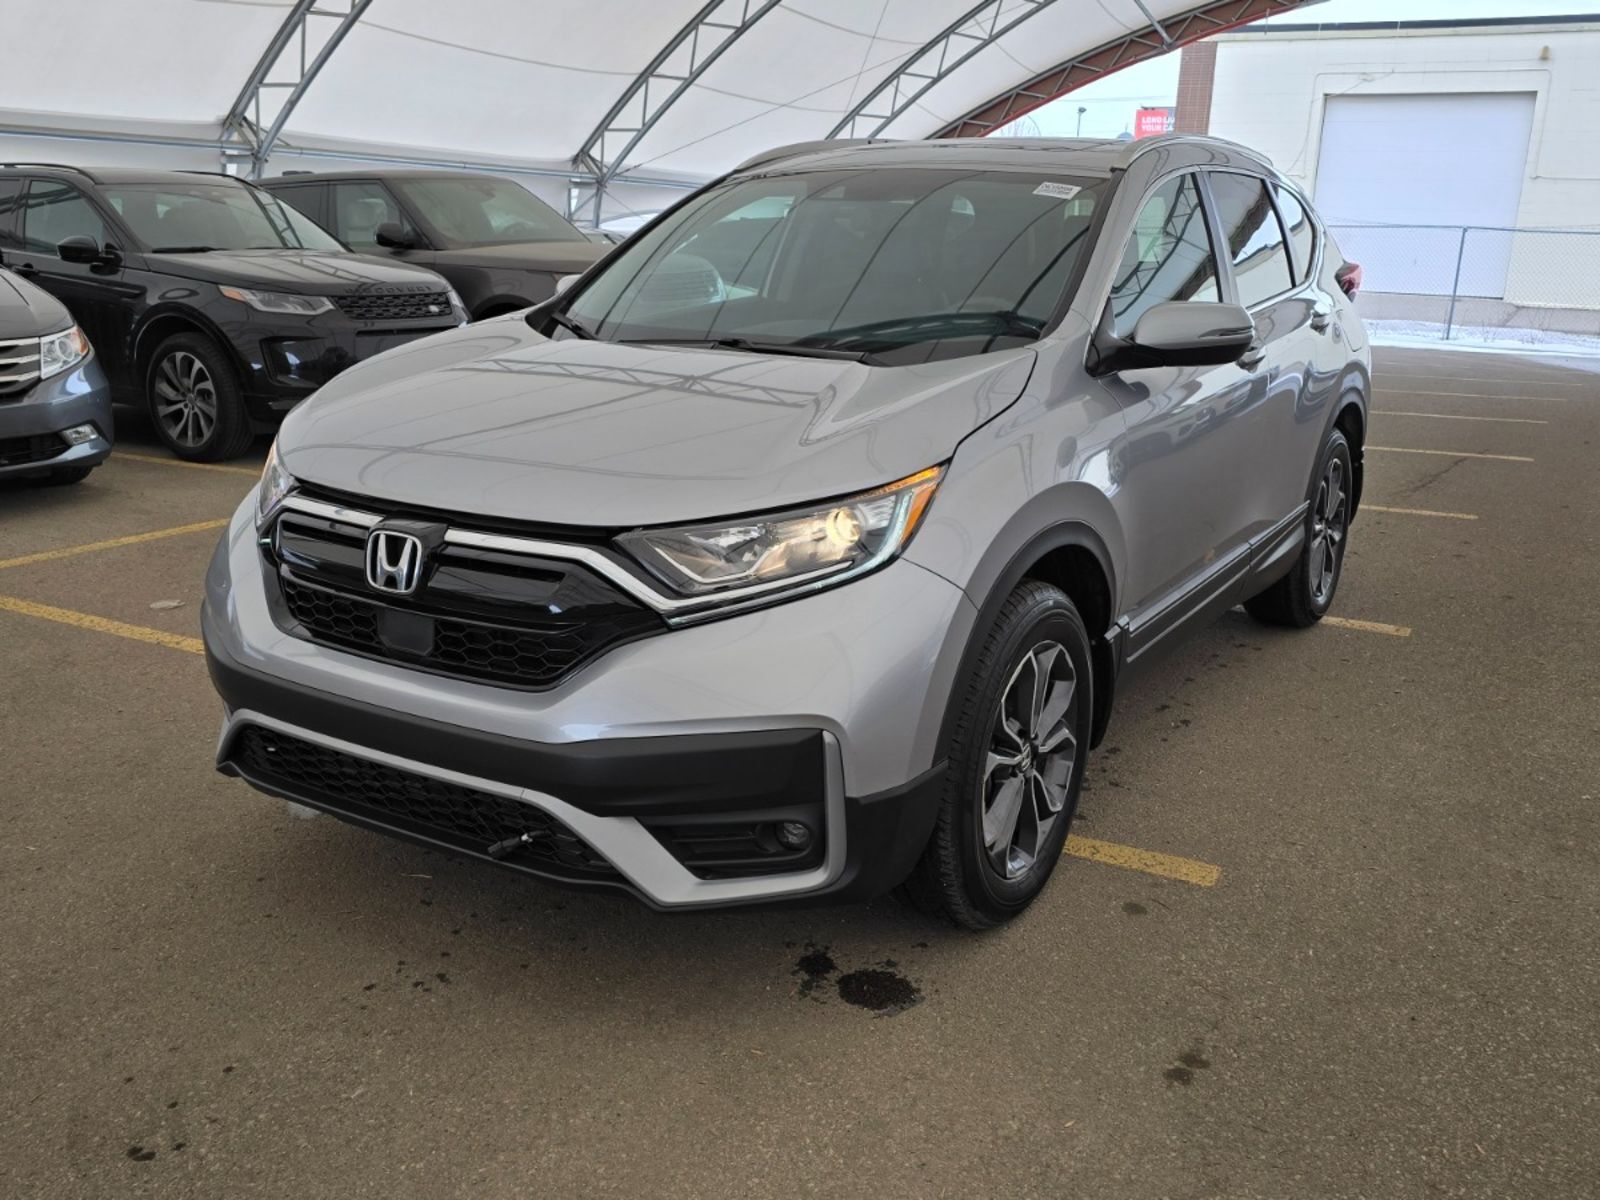 2020 Honda CR-V EX-L - No Accidents, One Owner, Heated Wheel